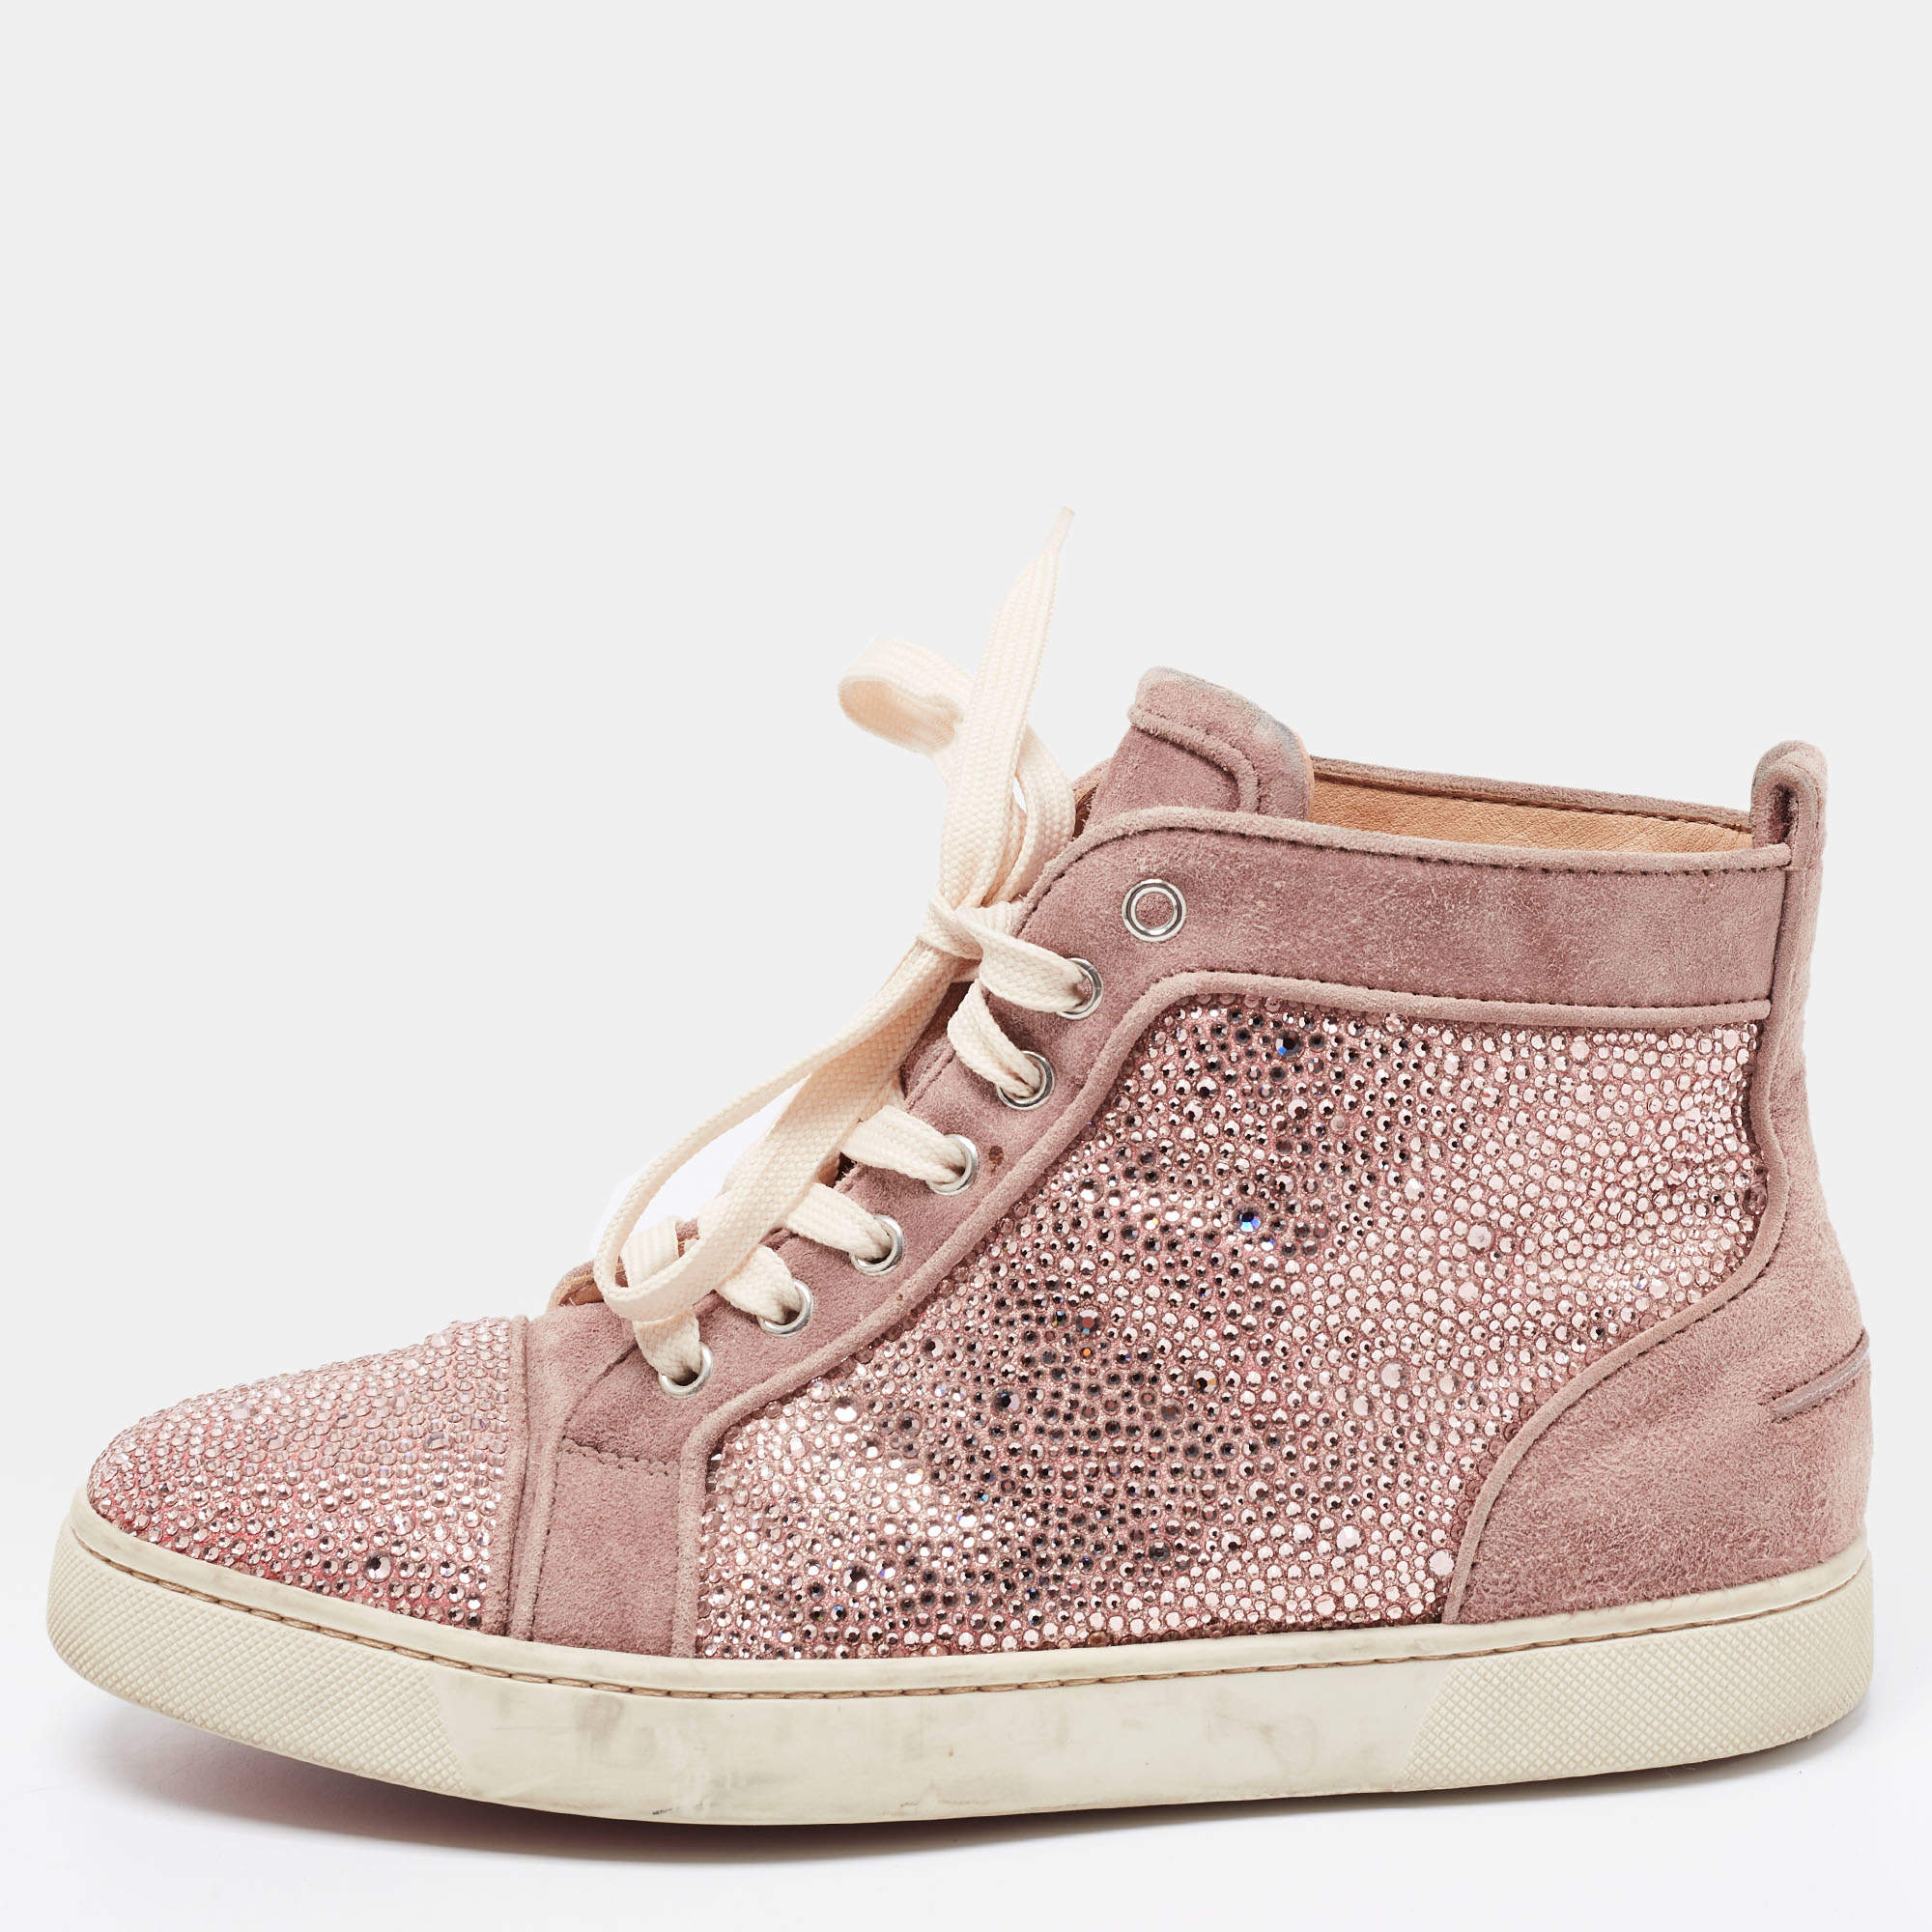 Louis Sp Strass High Top Sneakers in White - Christian Louboutin